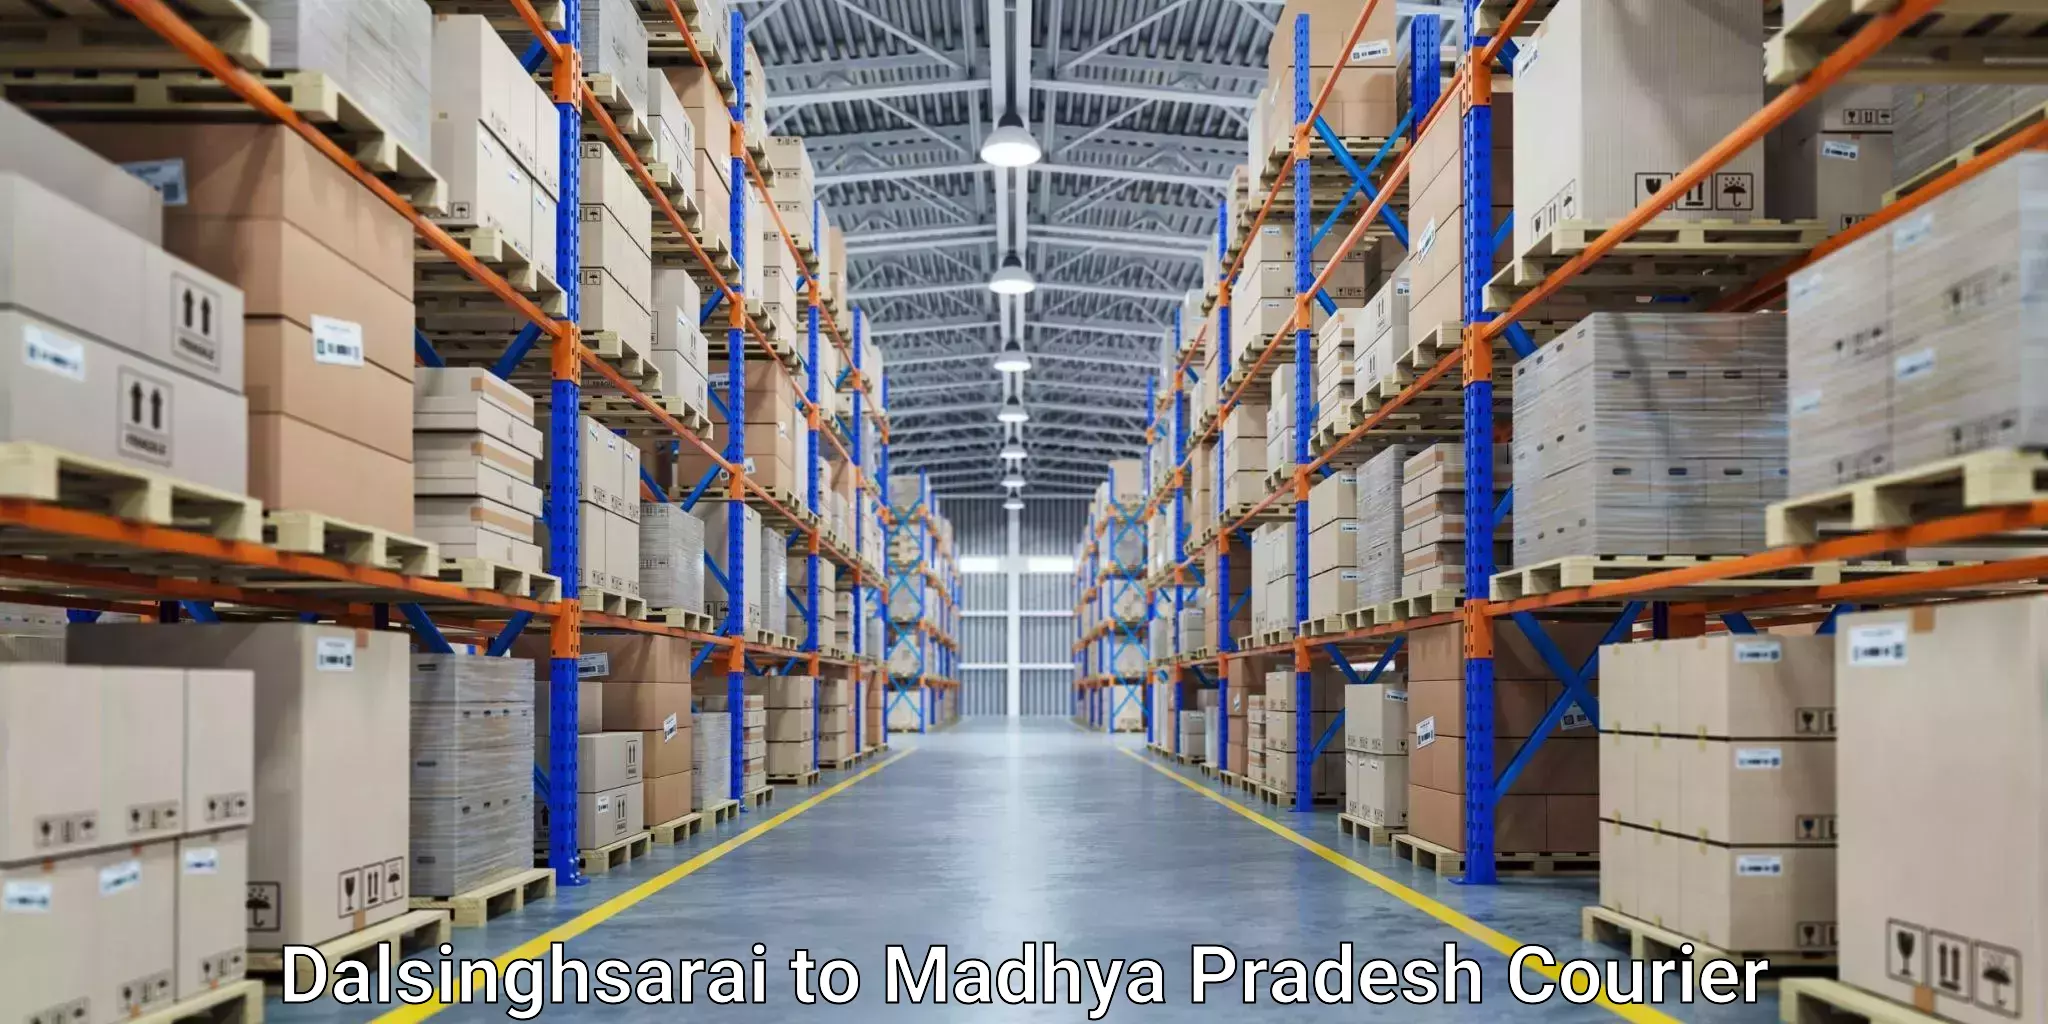 Supply chain delivery in Dalsinghsarai to Begumganj